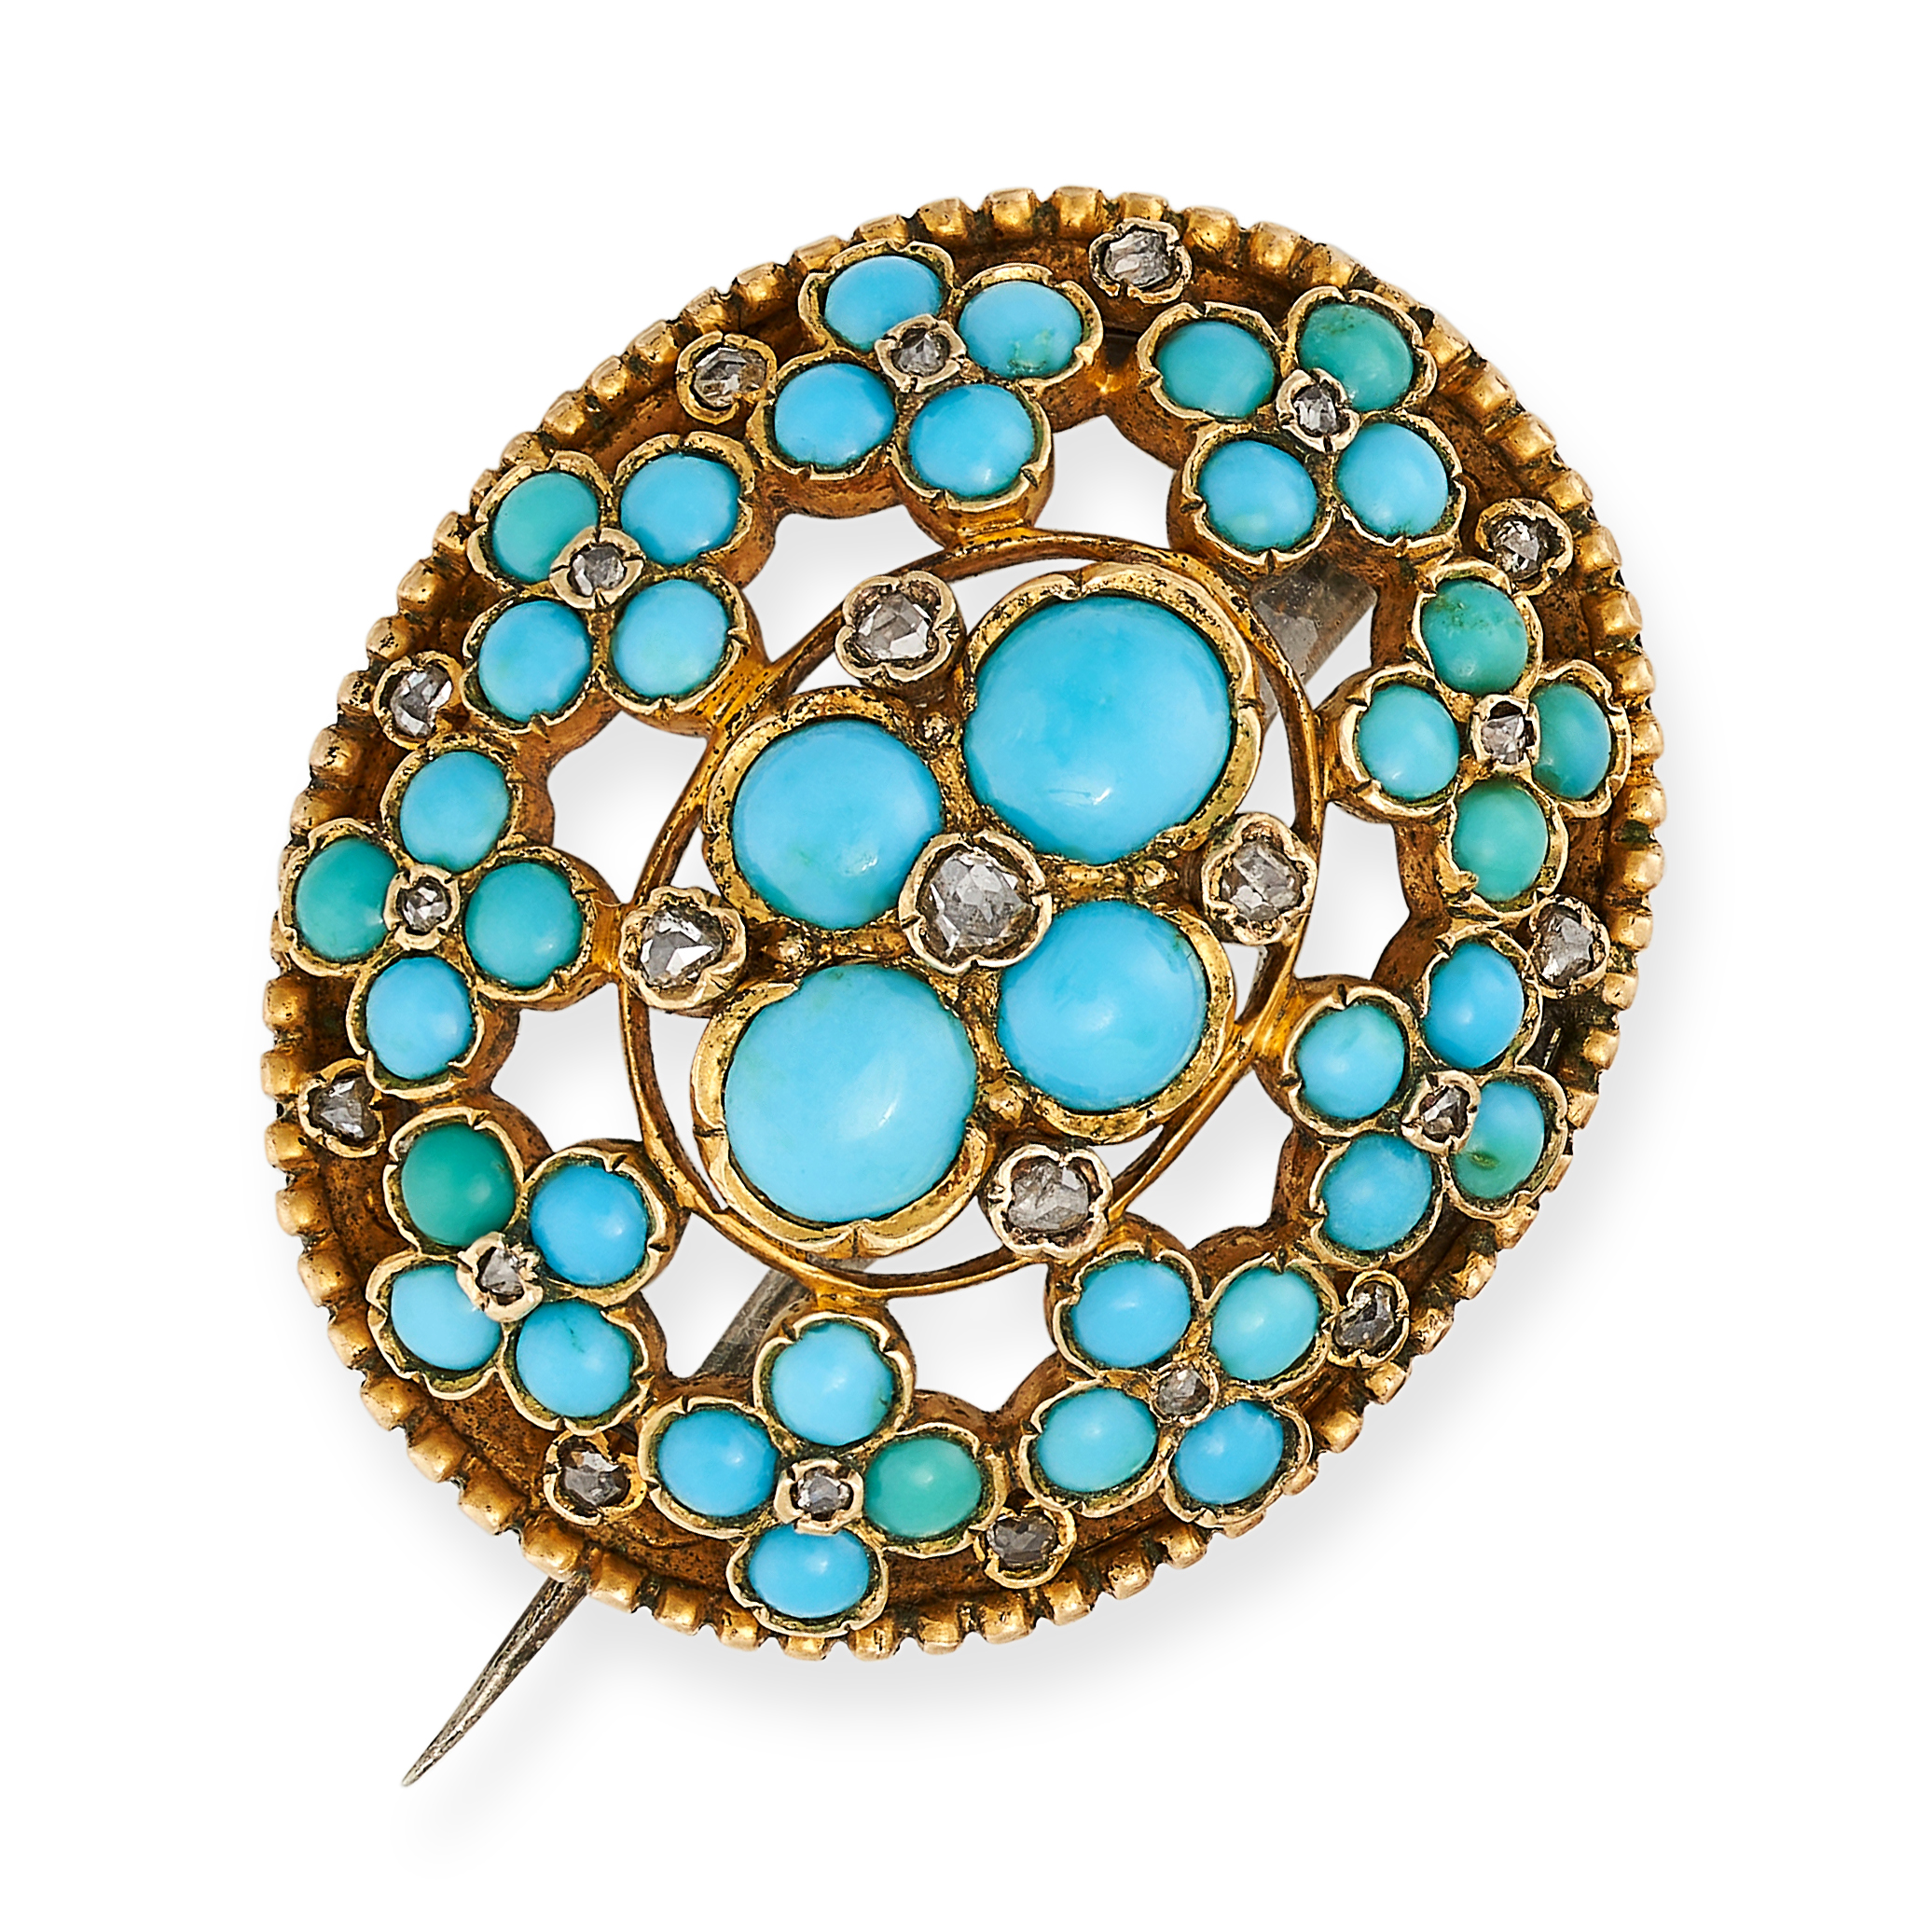 A TURQUOISE AND DIAMOND BROOCH the oval body set with cabochon turquoise in forget-me-not motifs